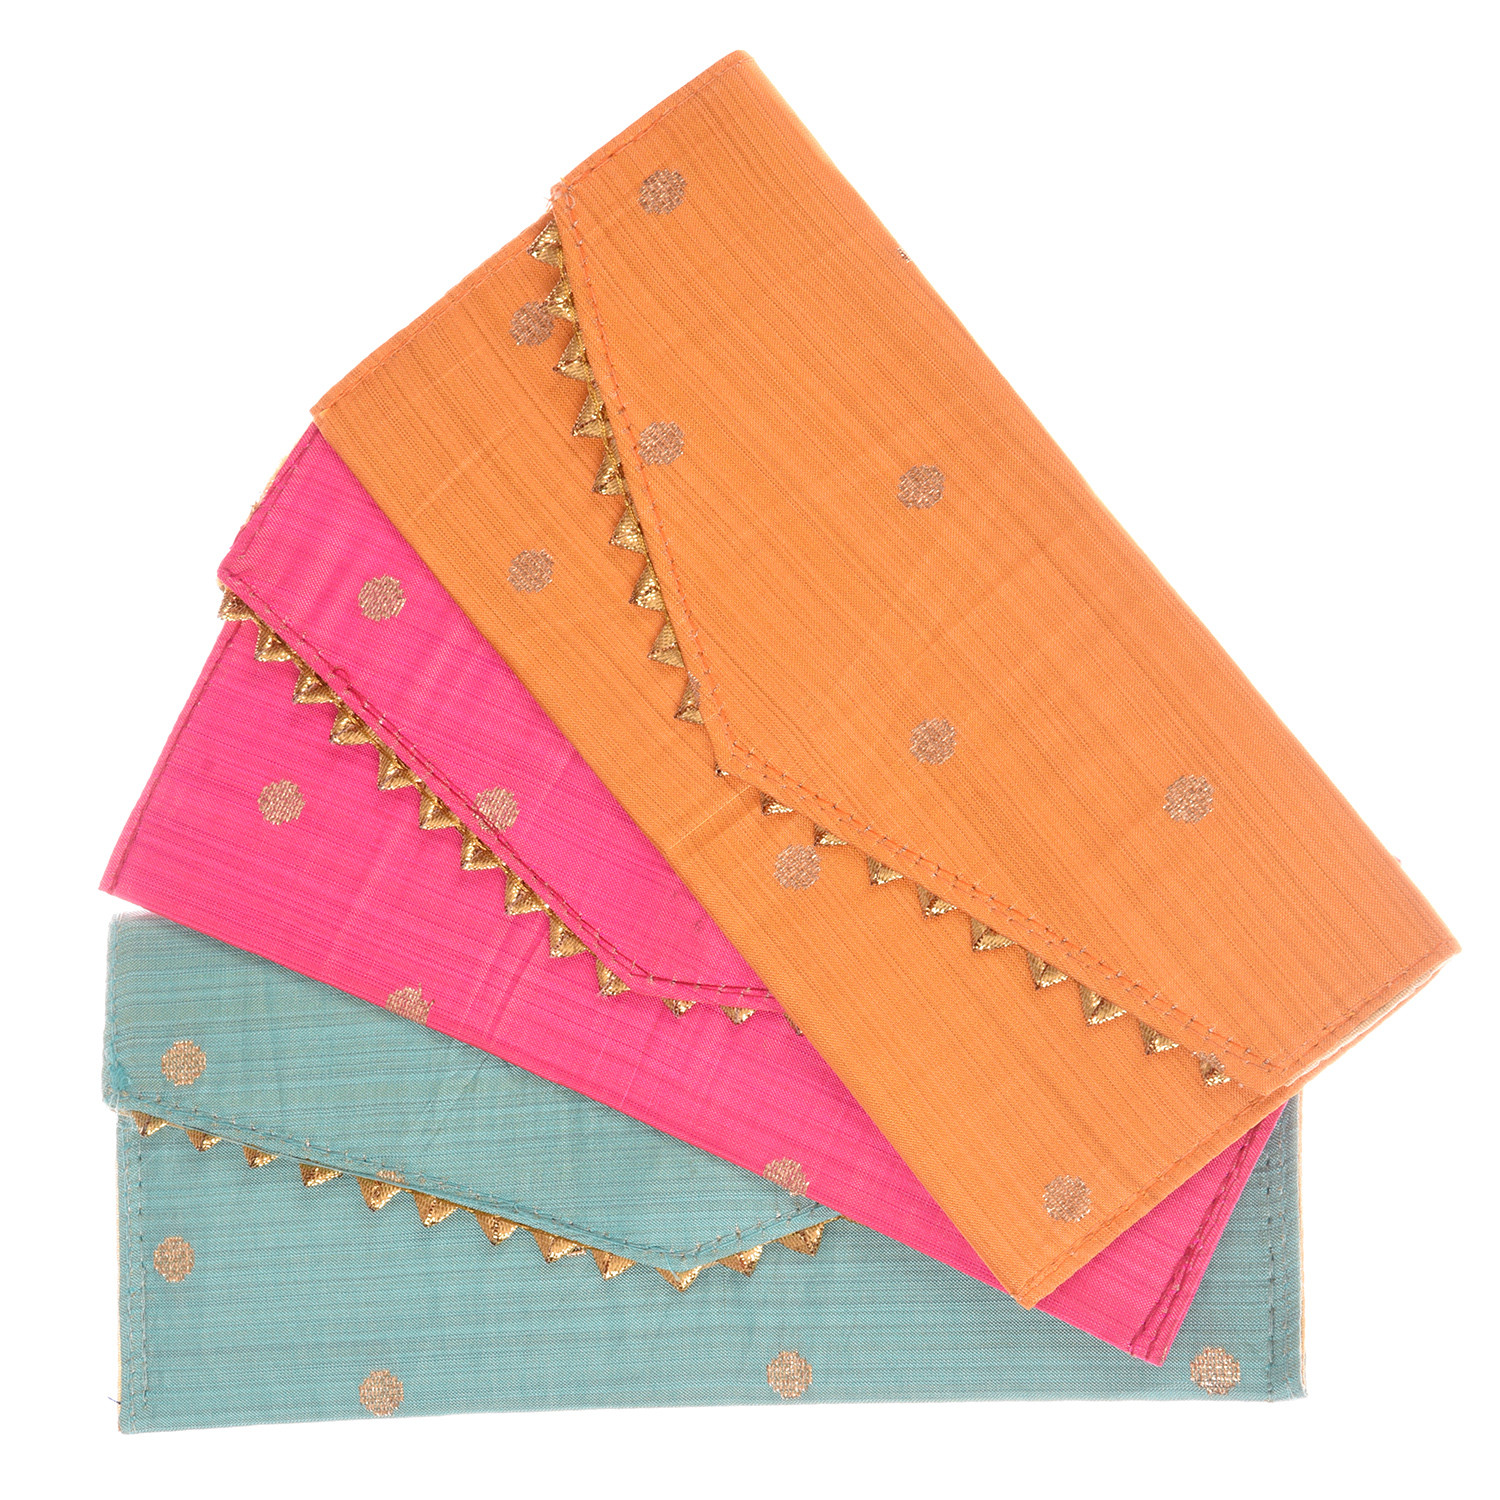 Kuber Industries Shagun Envelope for Gift|Dot Pattern for Gifting Lifafa|Cardboard Envelope for Marriage|Many Occassions (Assorted)